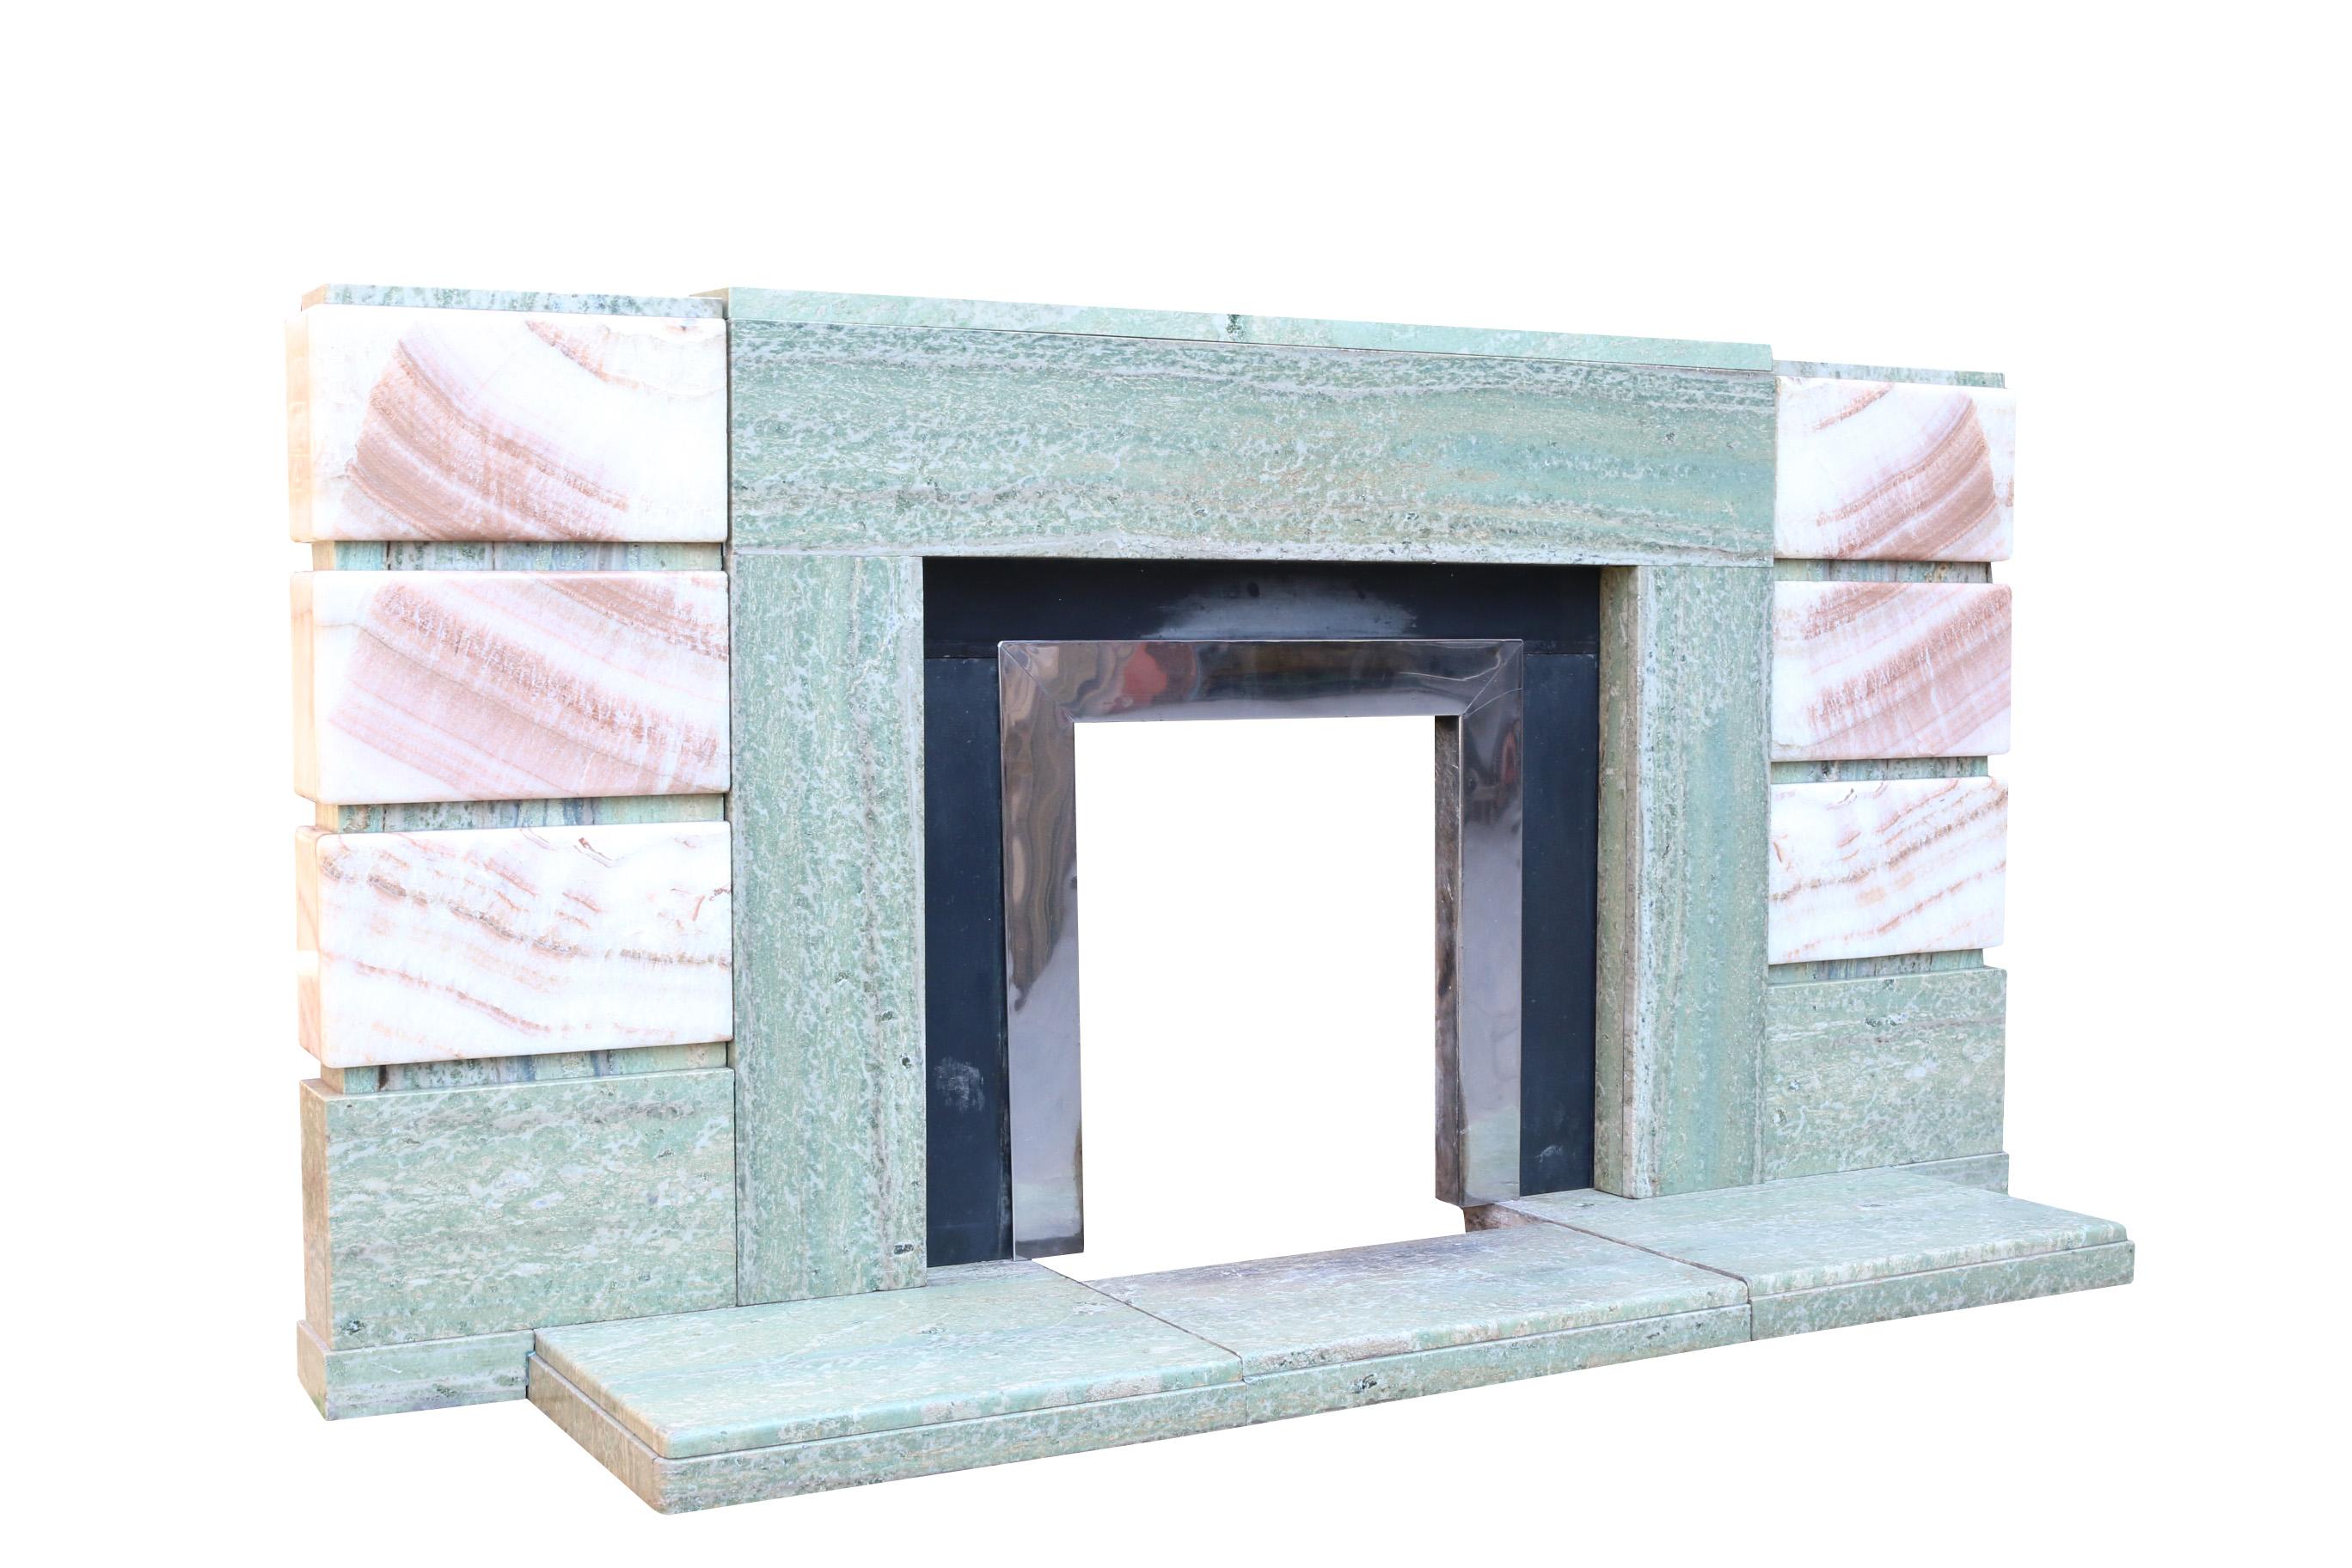 This Onyx and Connemara marble fire surround is in excellent original condition. It has black marble slips and a stainless steel insert.
Height 100.5 cm (including the hearth)
Width 198.5 cm (widest point)
Depth 12.5 cm (including the hearth 52